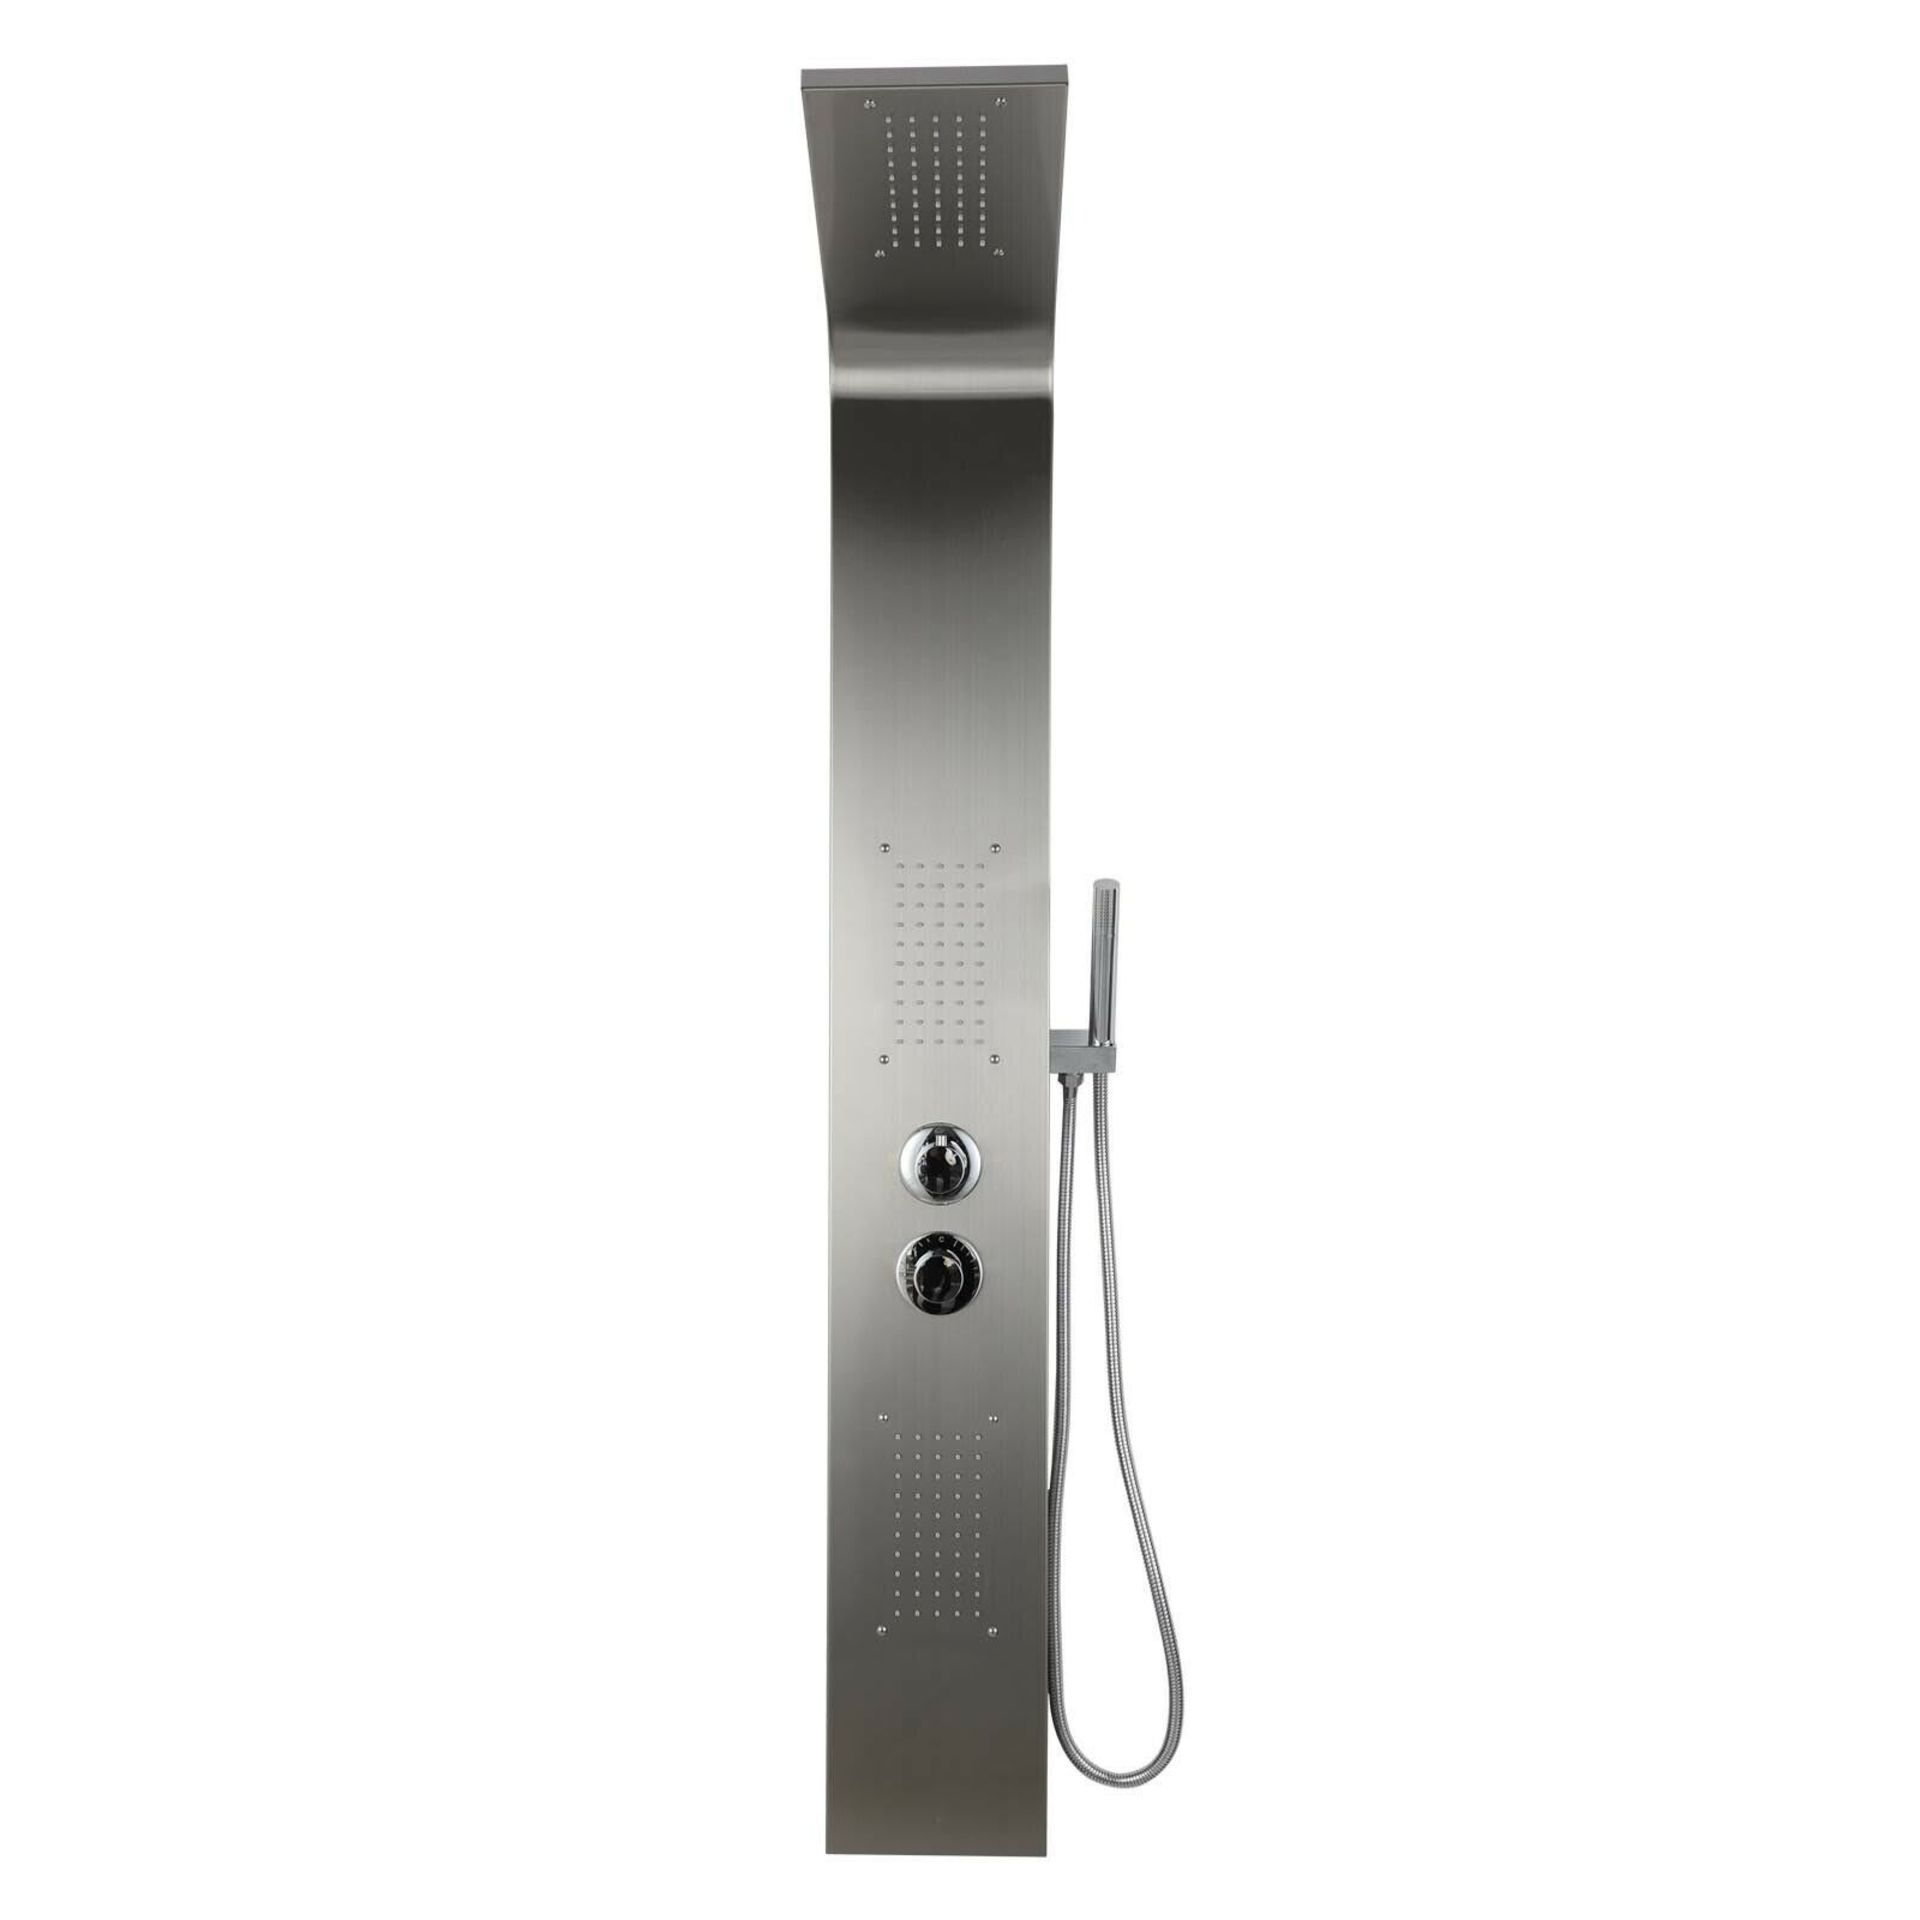 NEW (NS2) Chrome Modern Bathroom Shower Column Tower Panel System With Hand held Massage Jets.... - Image 3 of 3